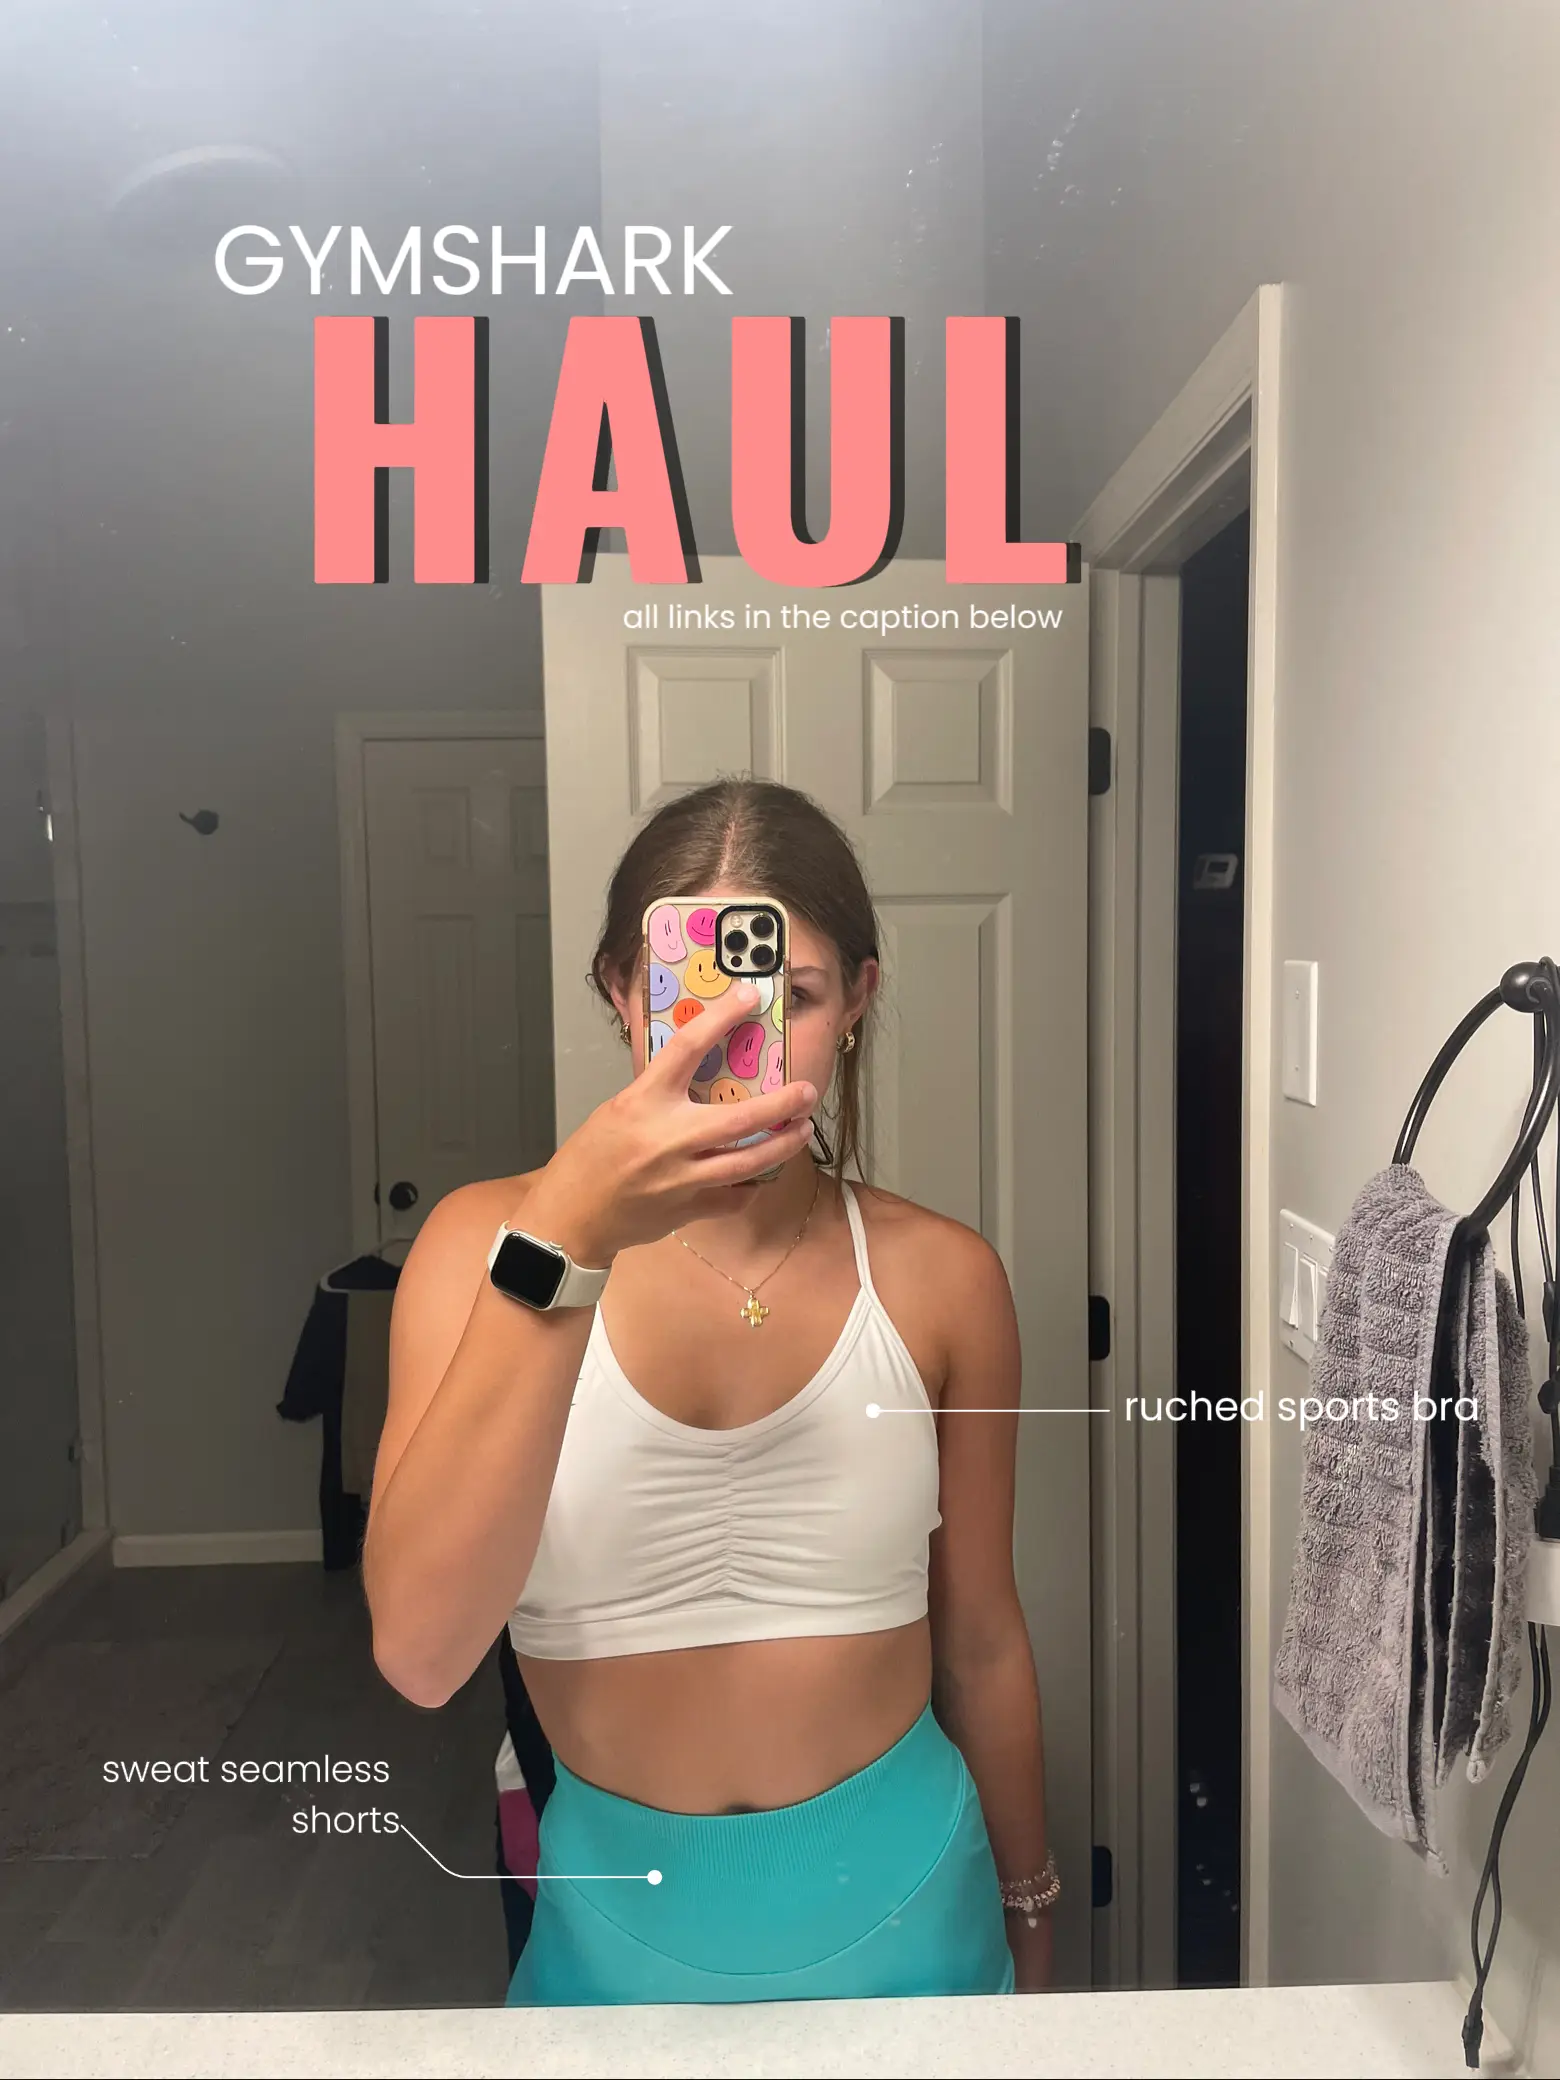 Gymshark latest releases Haul - GS Power, Adapt Camo, Crossover Shorts and  Bra, Vital Shorts 